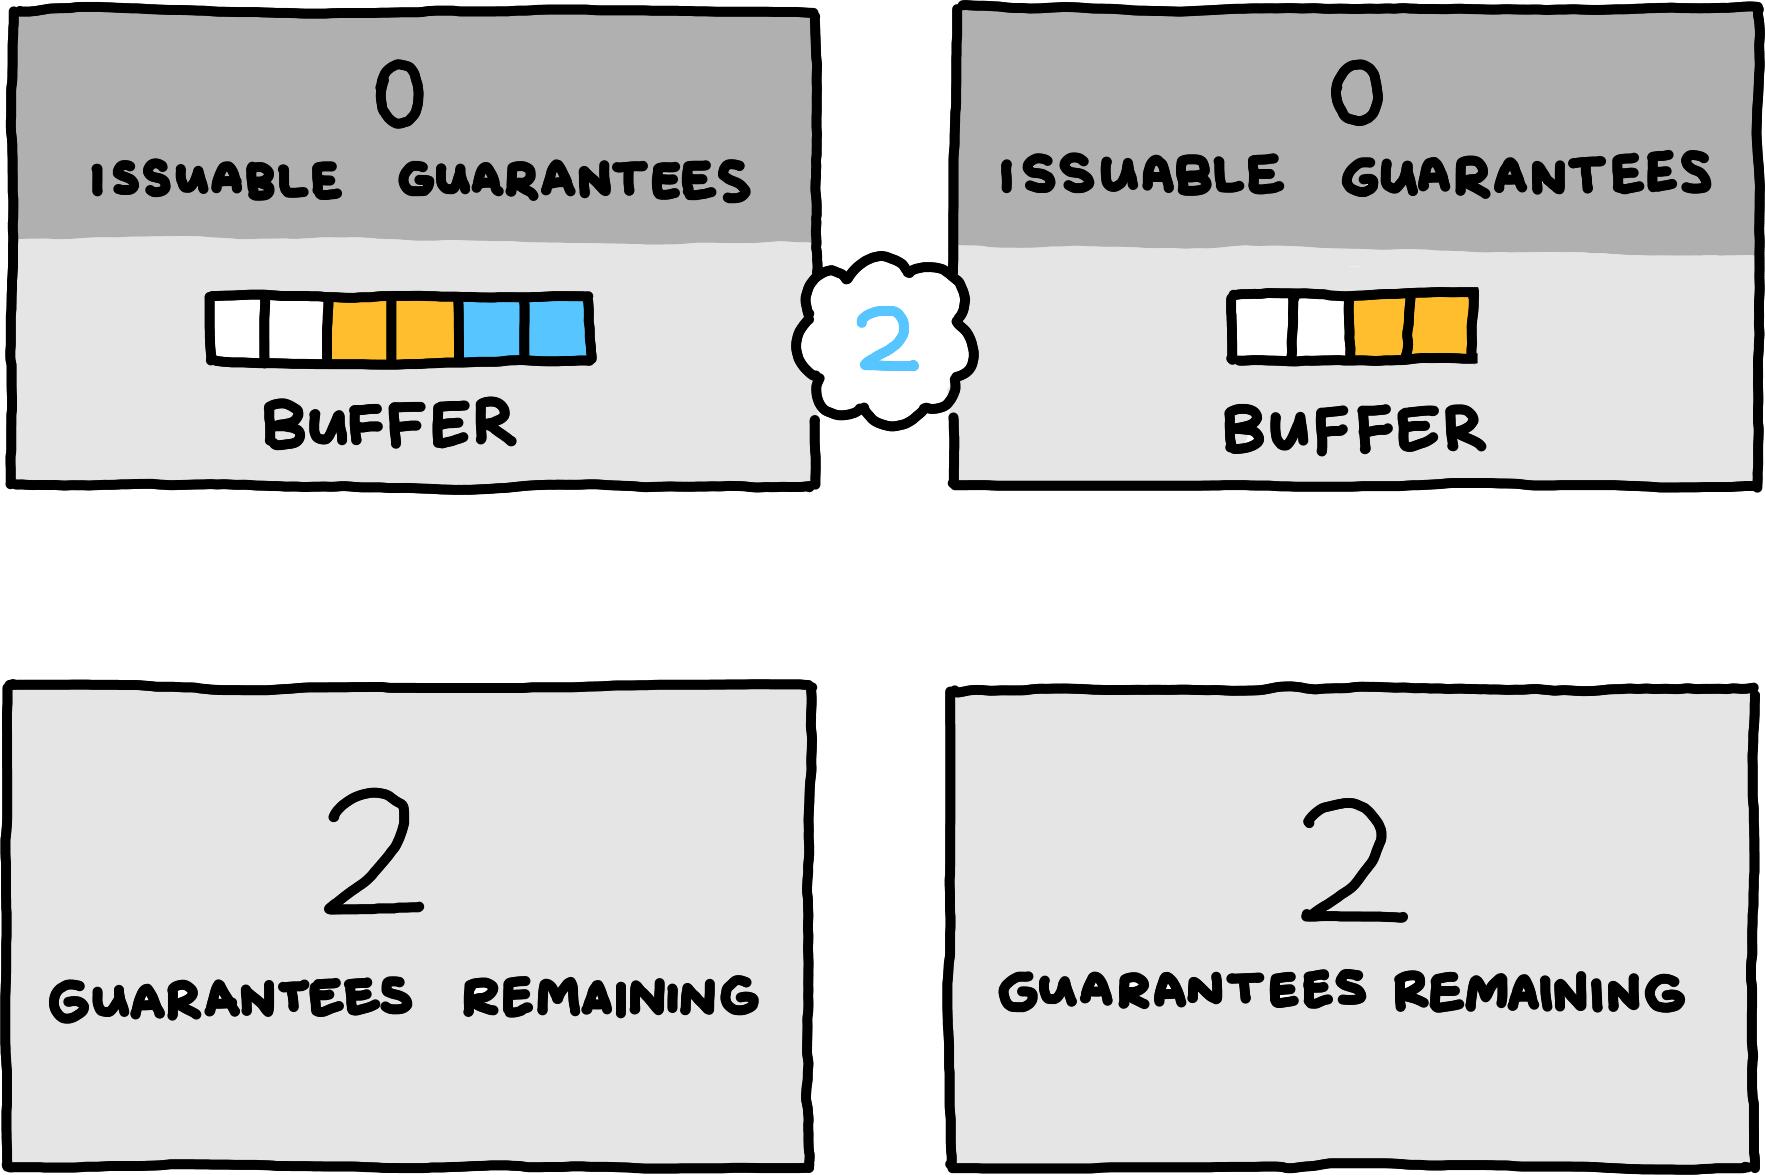 A server-client diagram. The server starts out with a buffer containing two empty slots, and two messages of two bytes each. It has zero issuable guarantees, putting the client at two remaining guarantees. The server then processes a message and decreases its total buffer size by the message’s size. All other state remains unchanged.